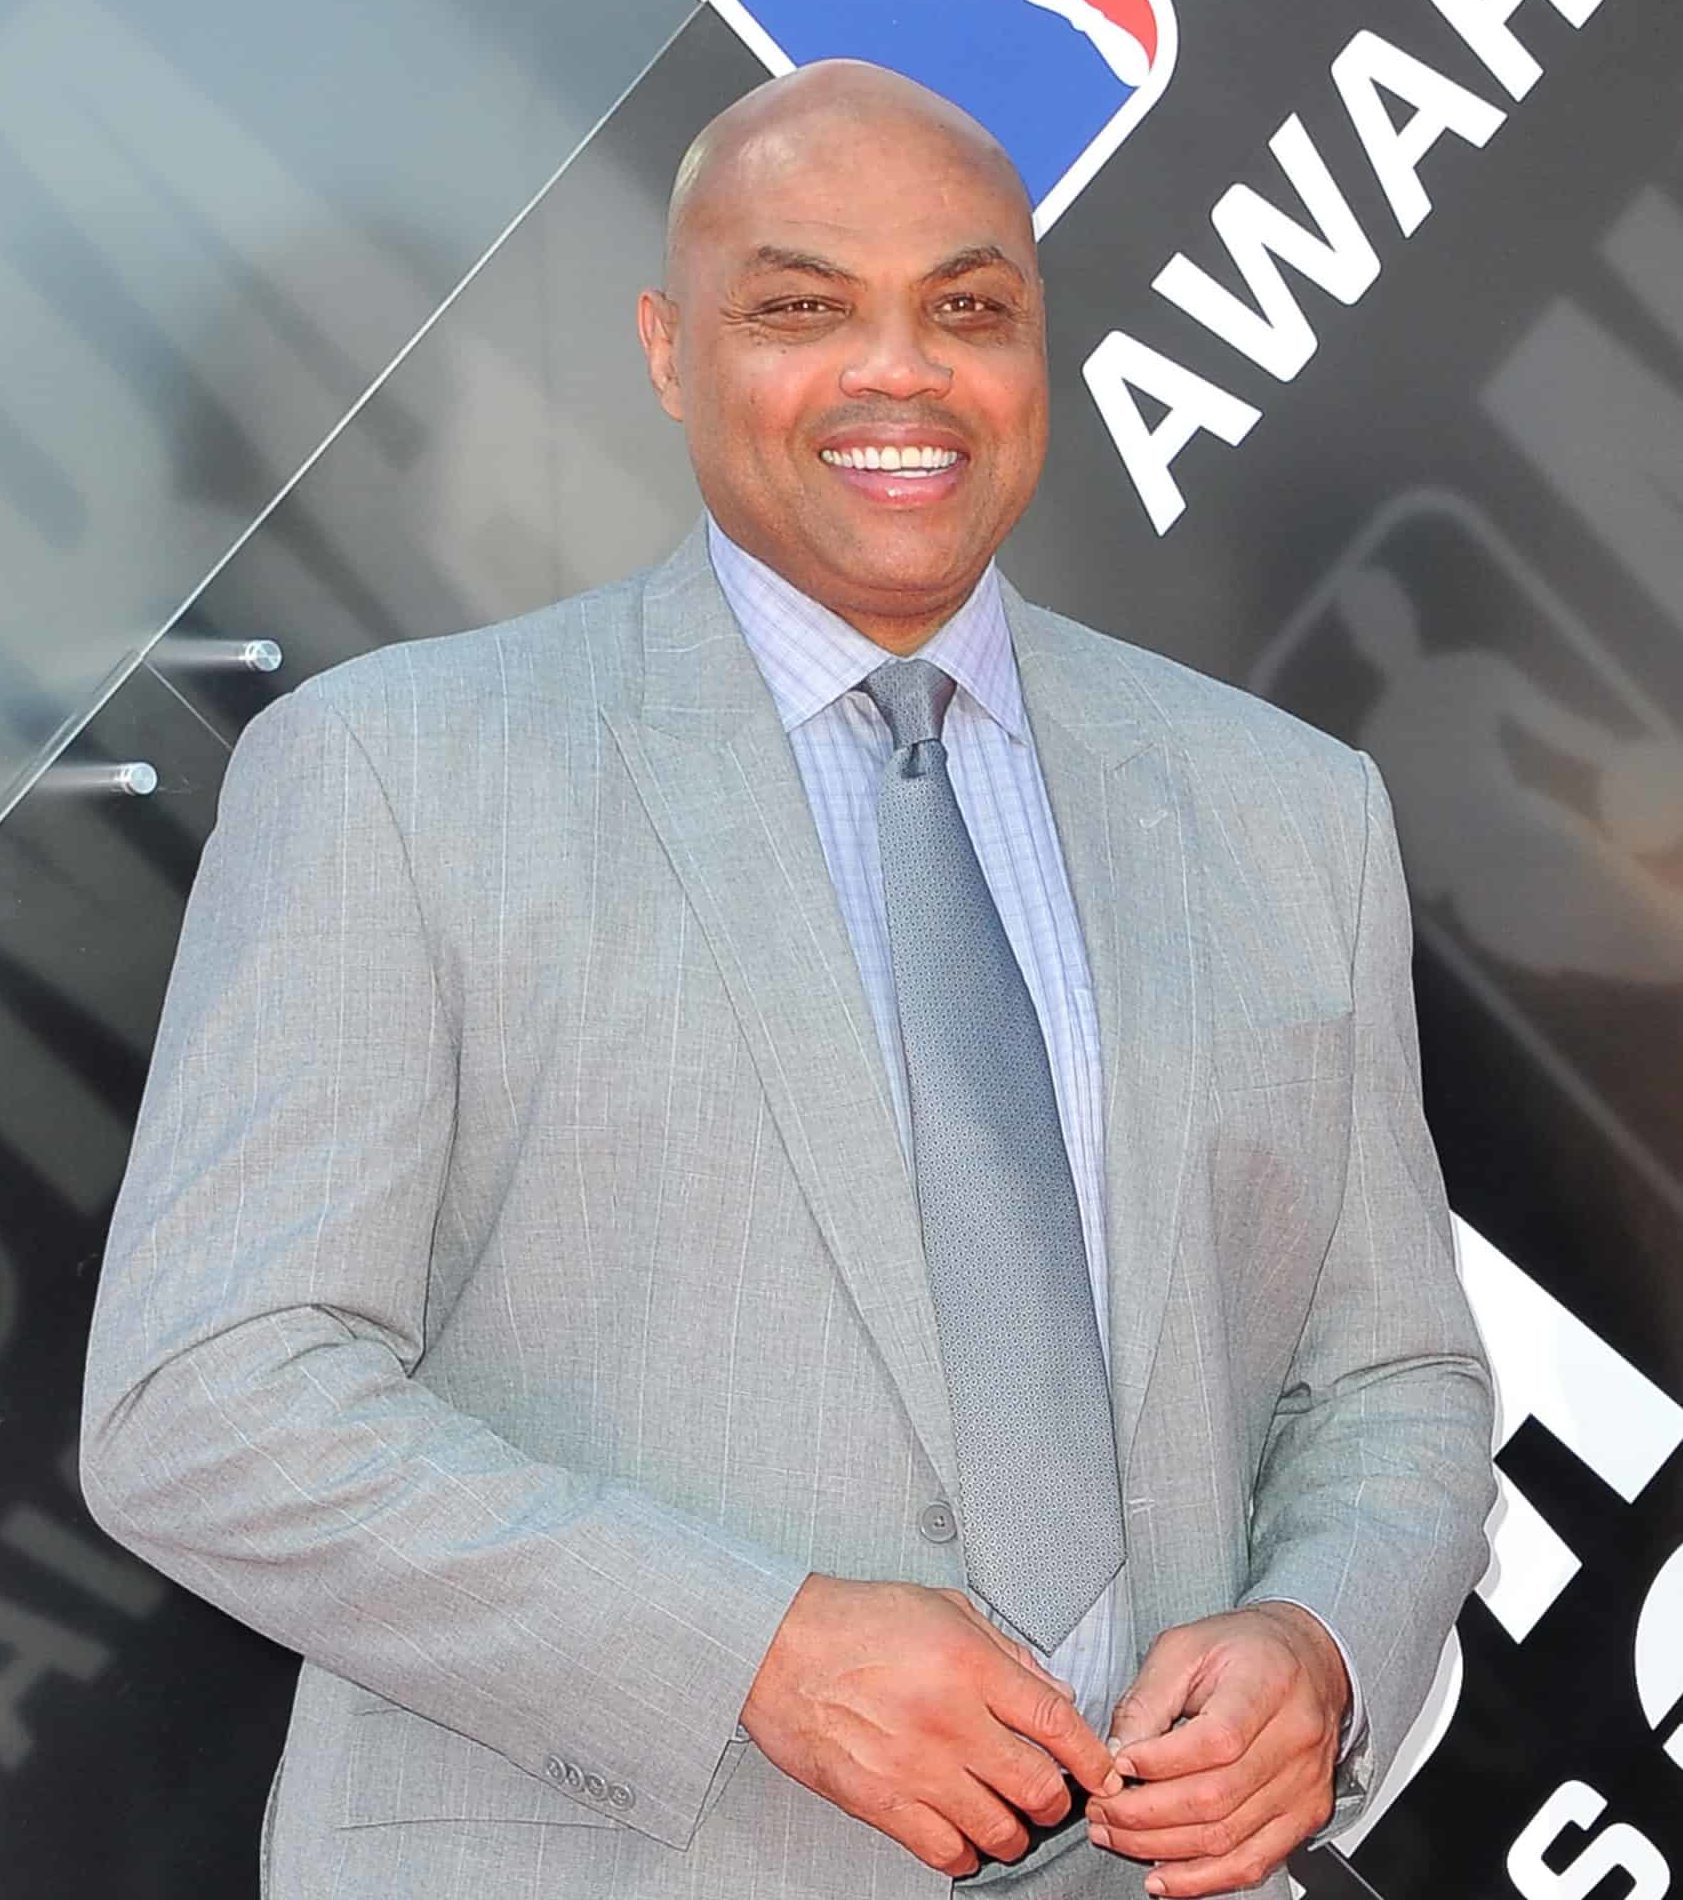 Charles Barkley Gifted $1,000 To Every Employee Working In His Hometown’s School District